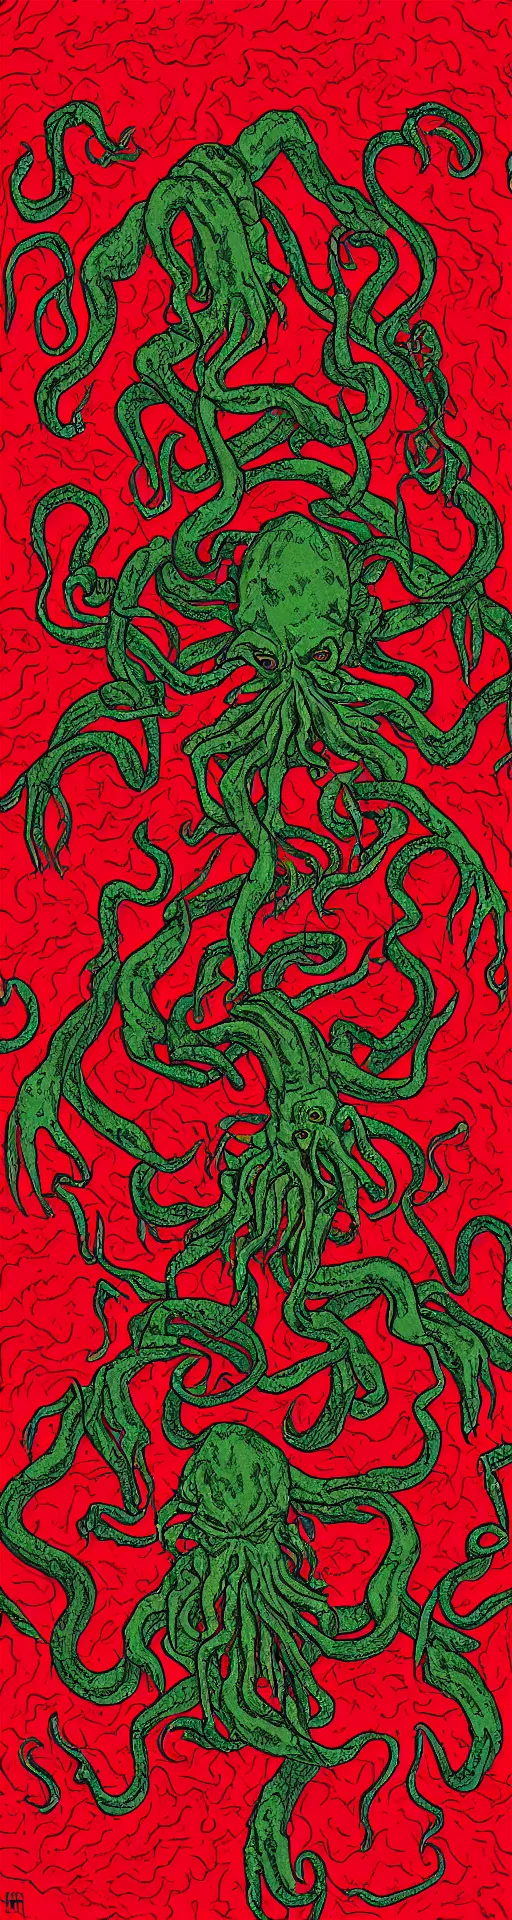 Prompt: Cthulhu lost inside the red room from Twin Peaks while David Lynch laughs in the background, fractal tile across the floor, Bob, mike judge art style, 90s mtv illustration